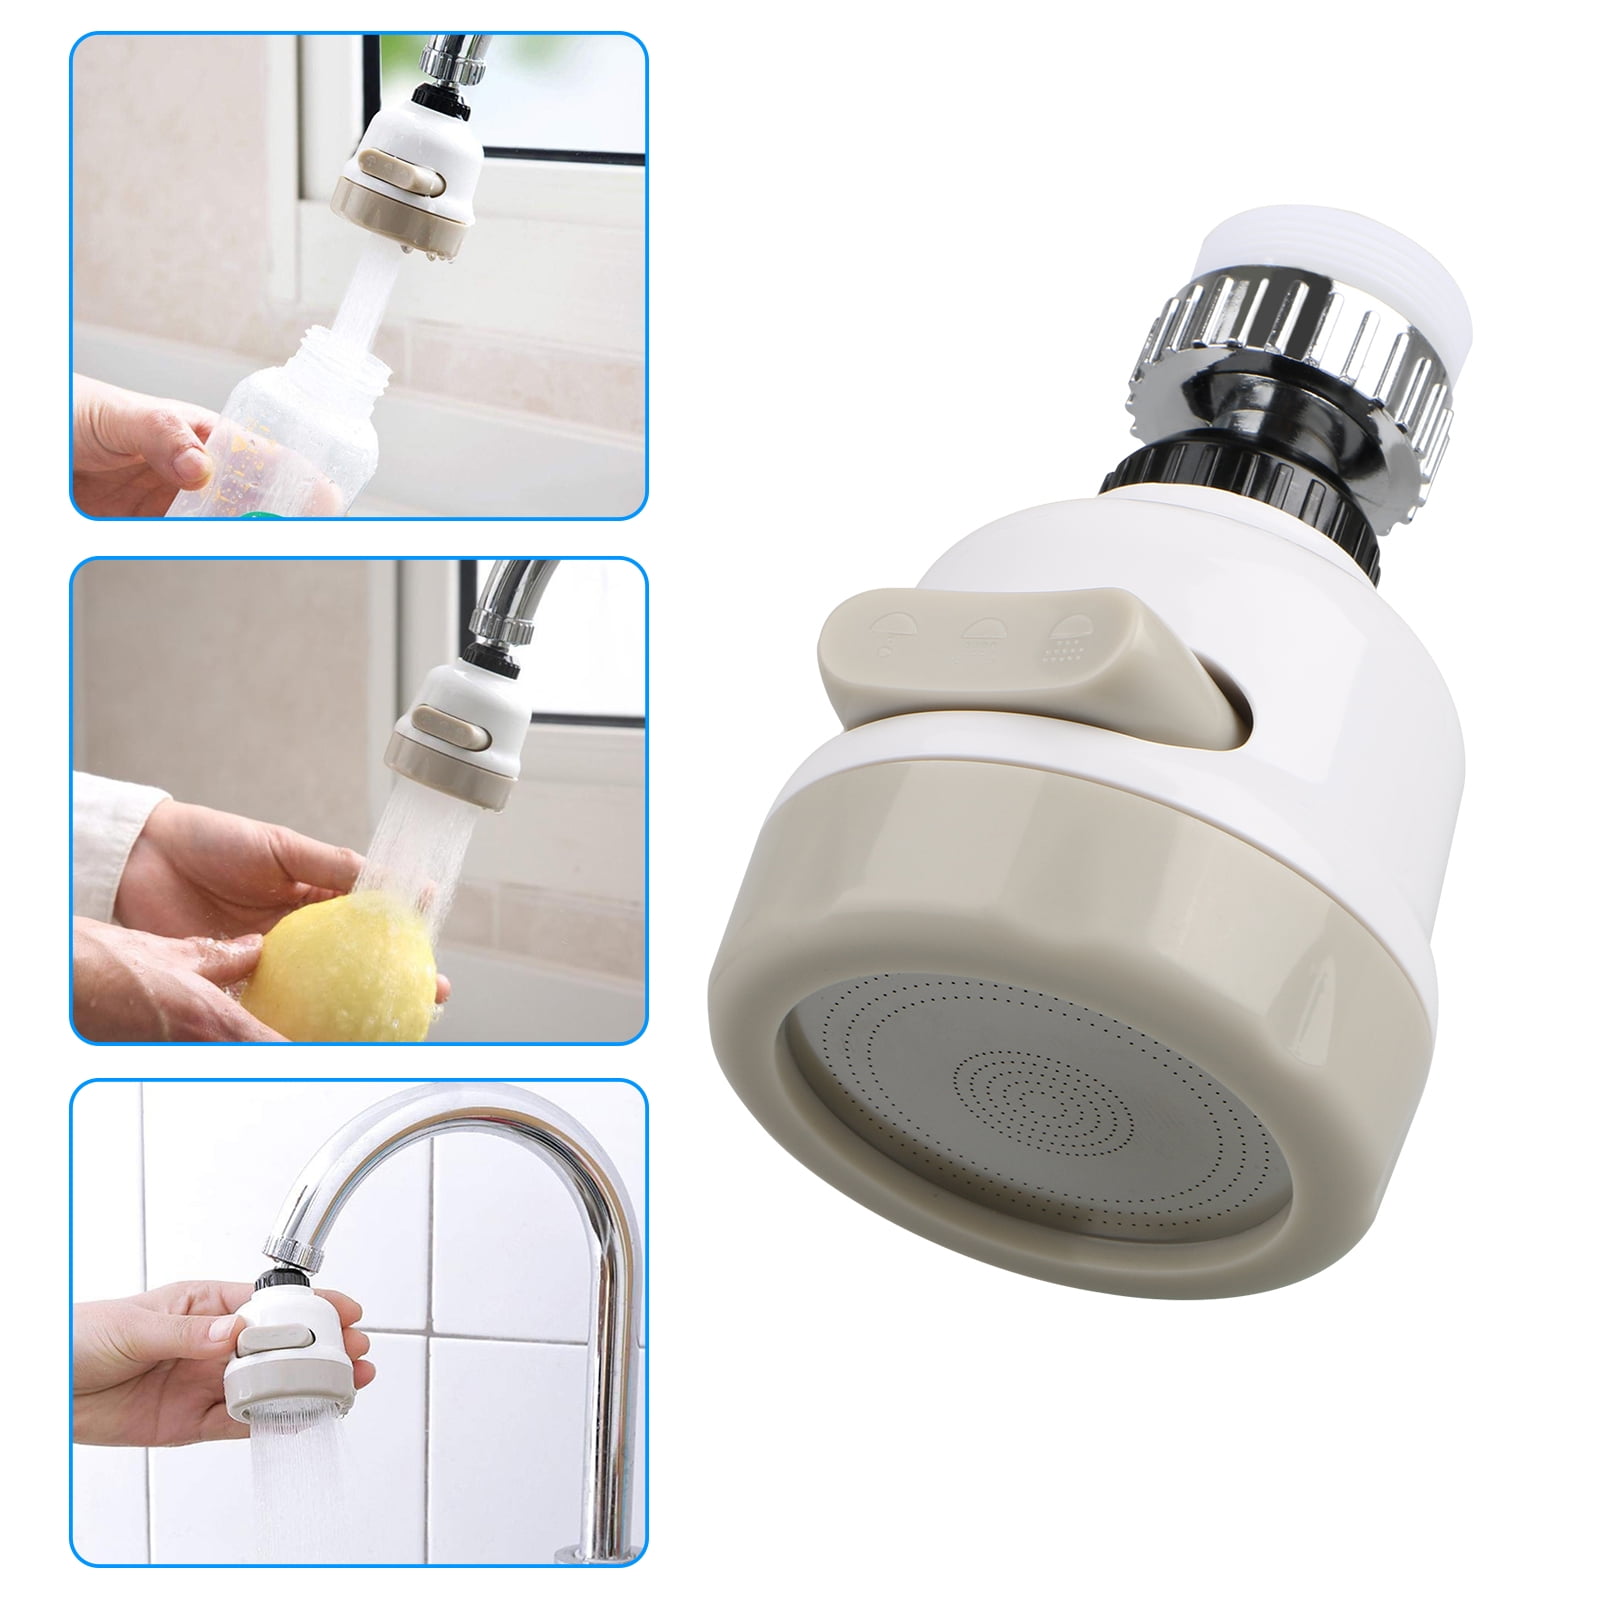 360° Rotate Swivel Faucet Adapter Water Saving Kitchen Tap Head Spray Filter